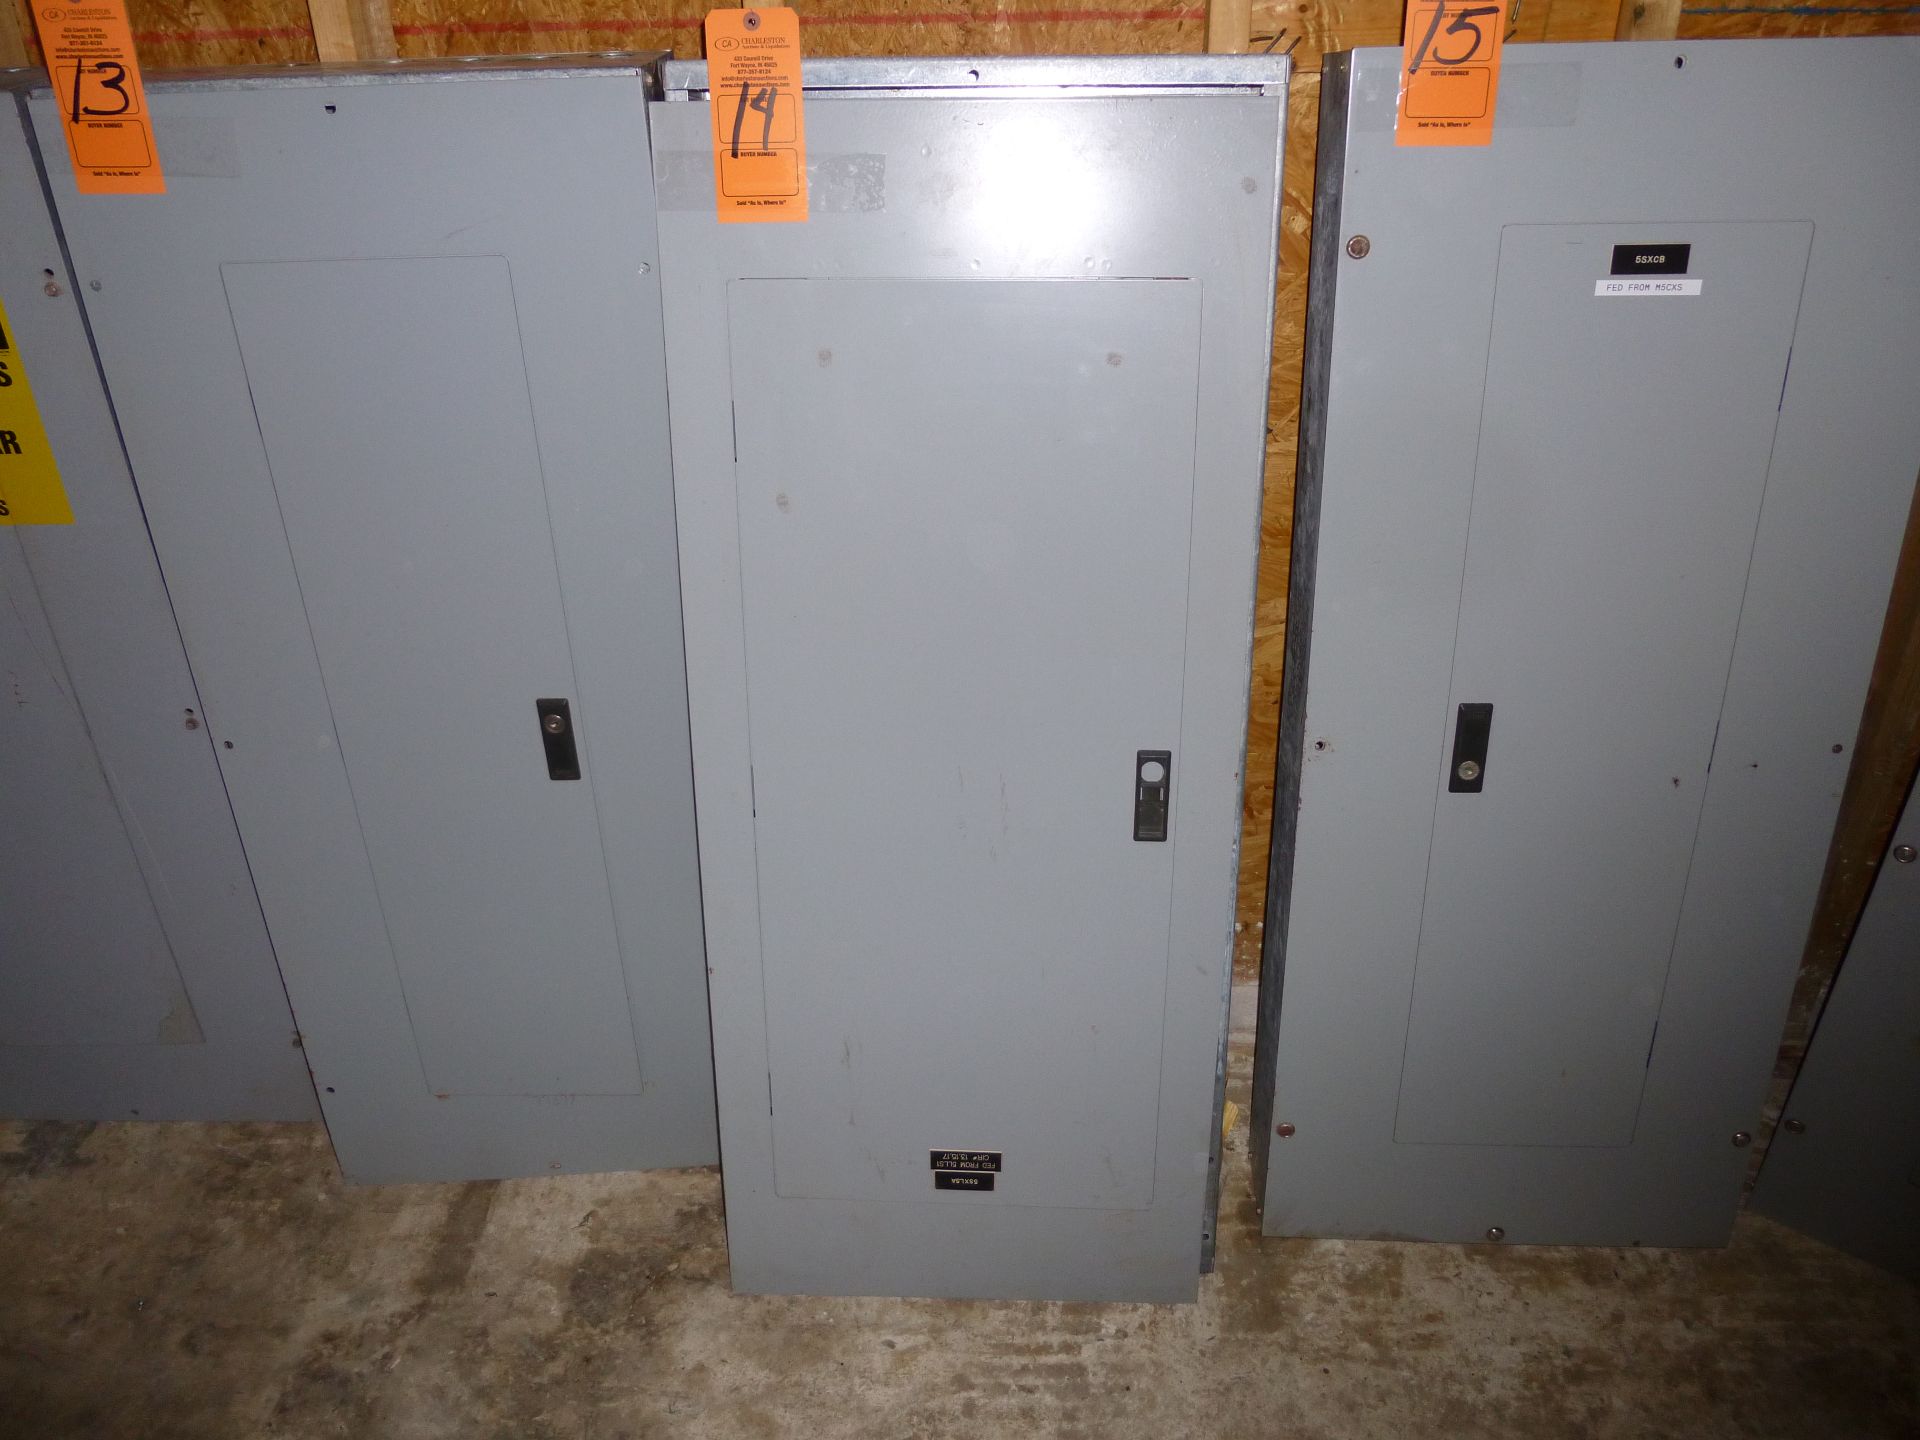 Cutler Hammer model PRL1A, 100amp box, 120/208 volt, 3 phase, 4 wire, includes all breakers as